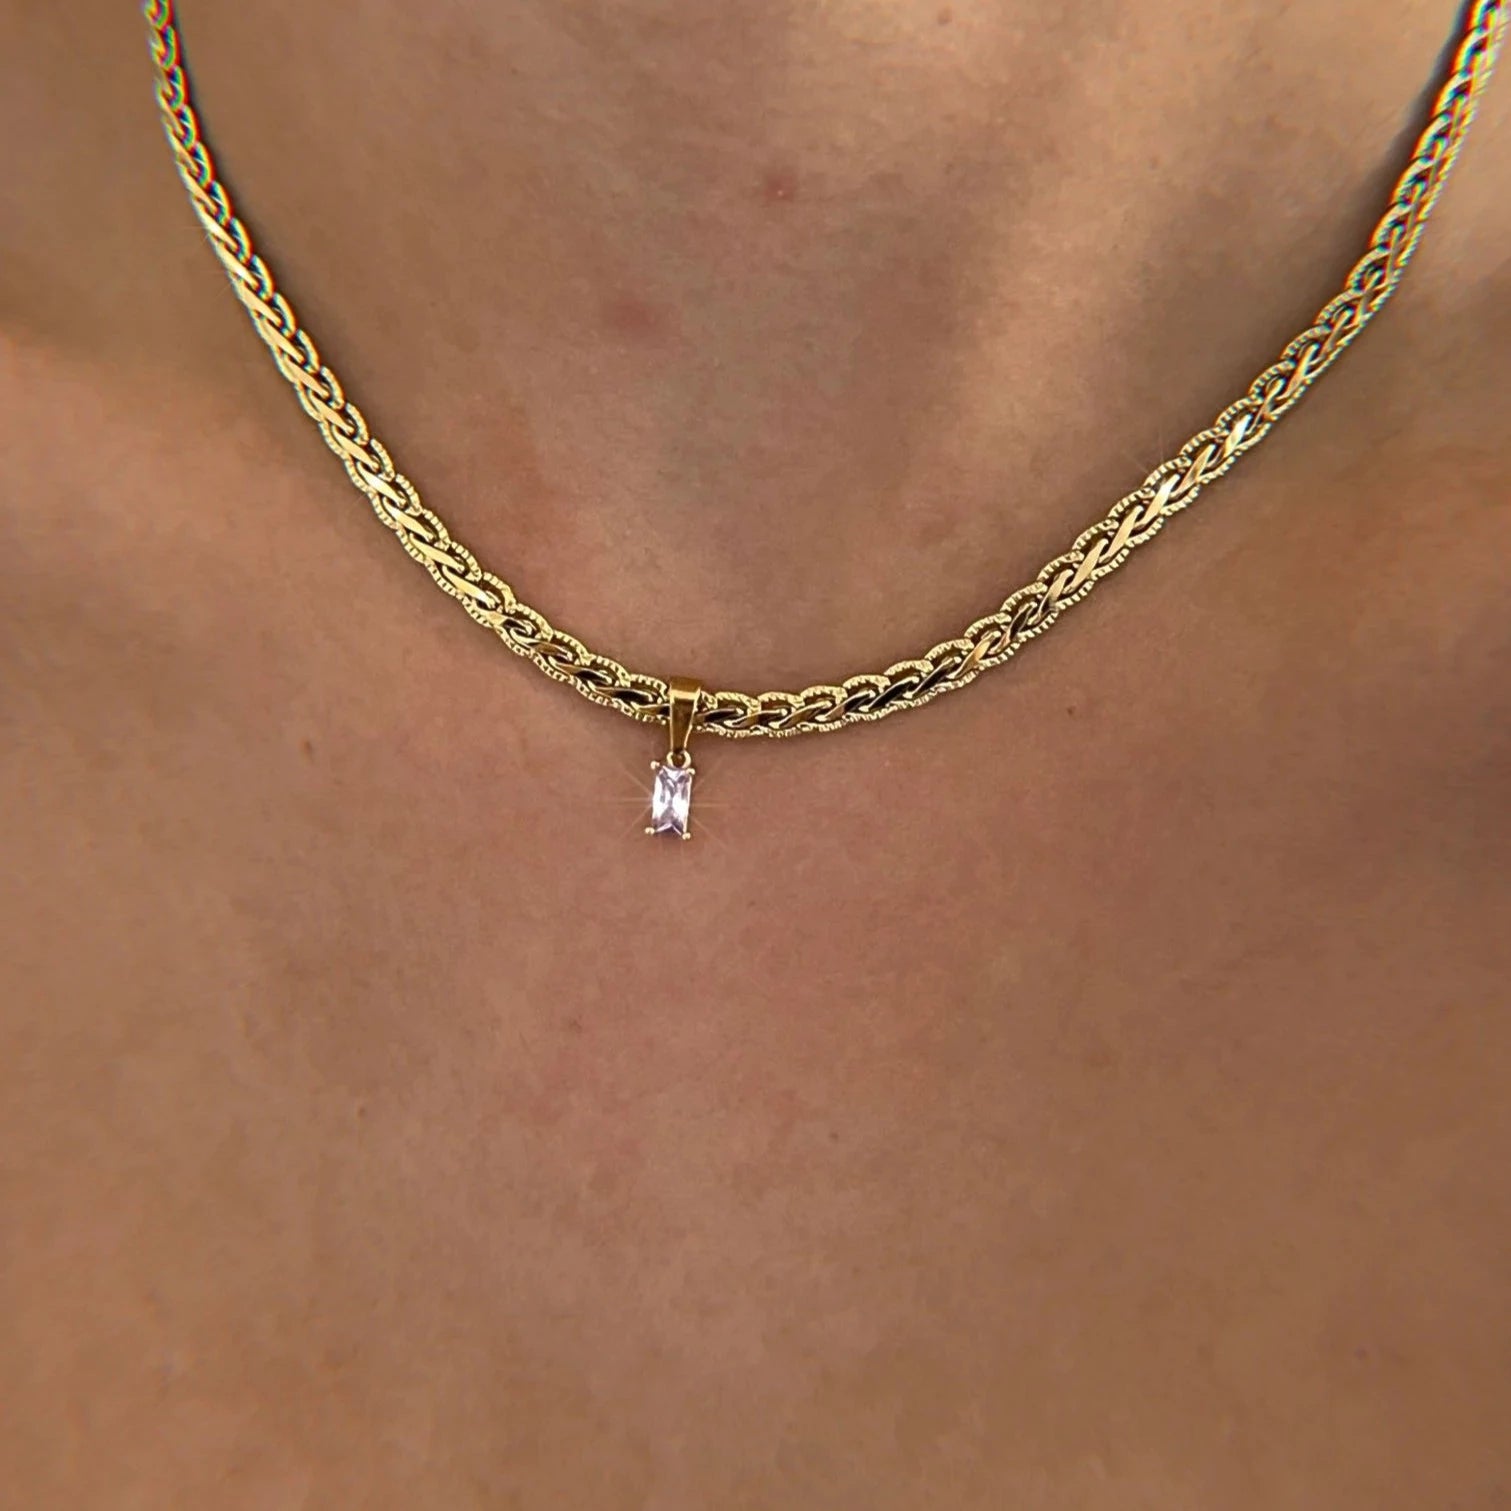 Clear Gem Necklace - Cosmic Chains 